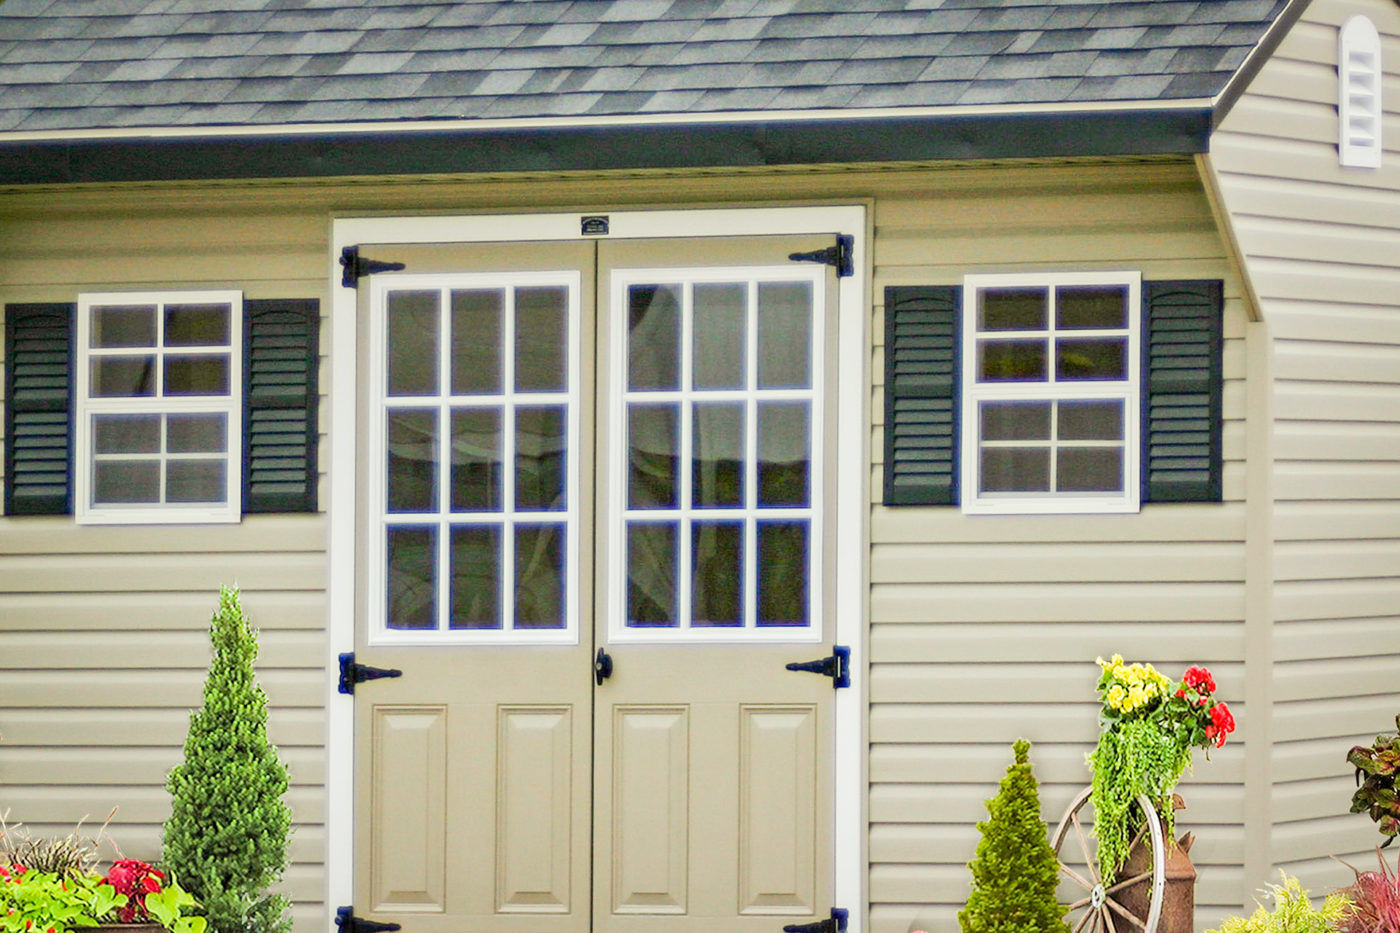 Garden shed kit windows and doors options